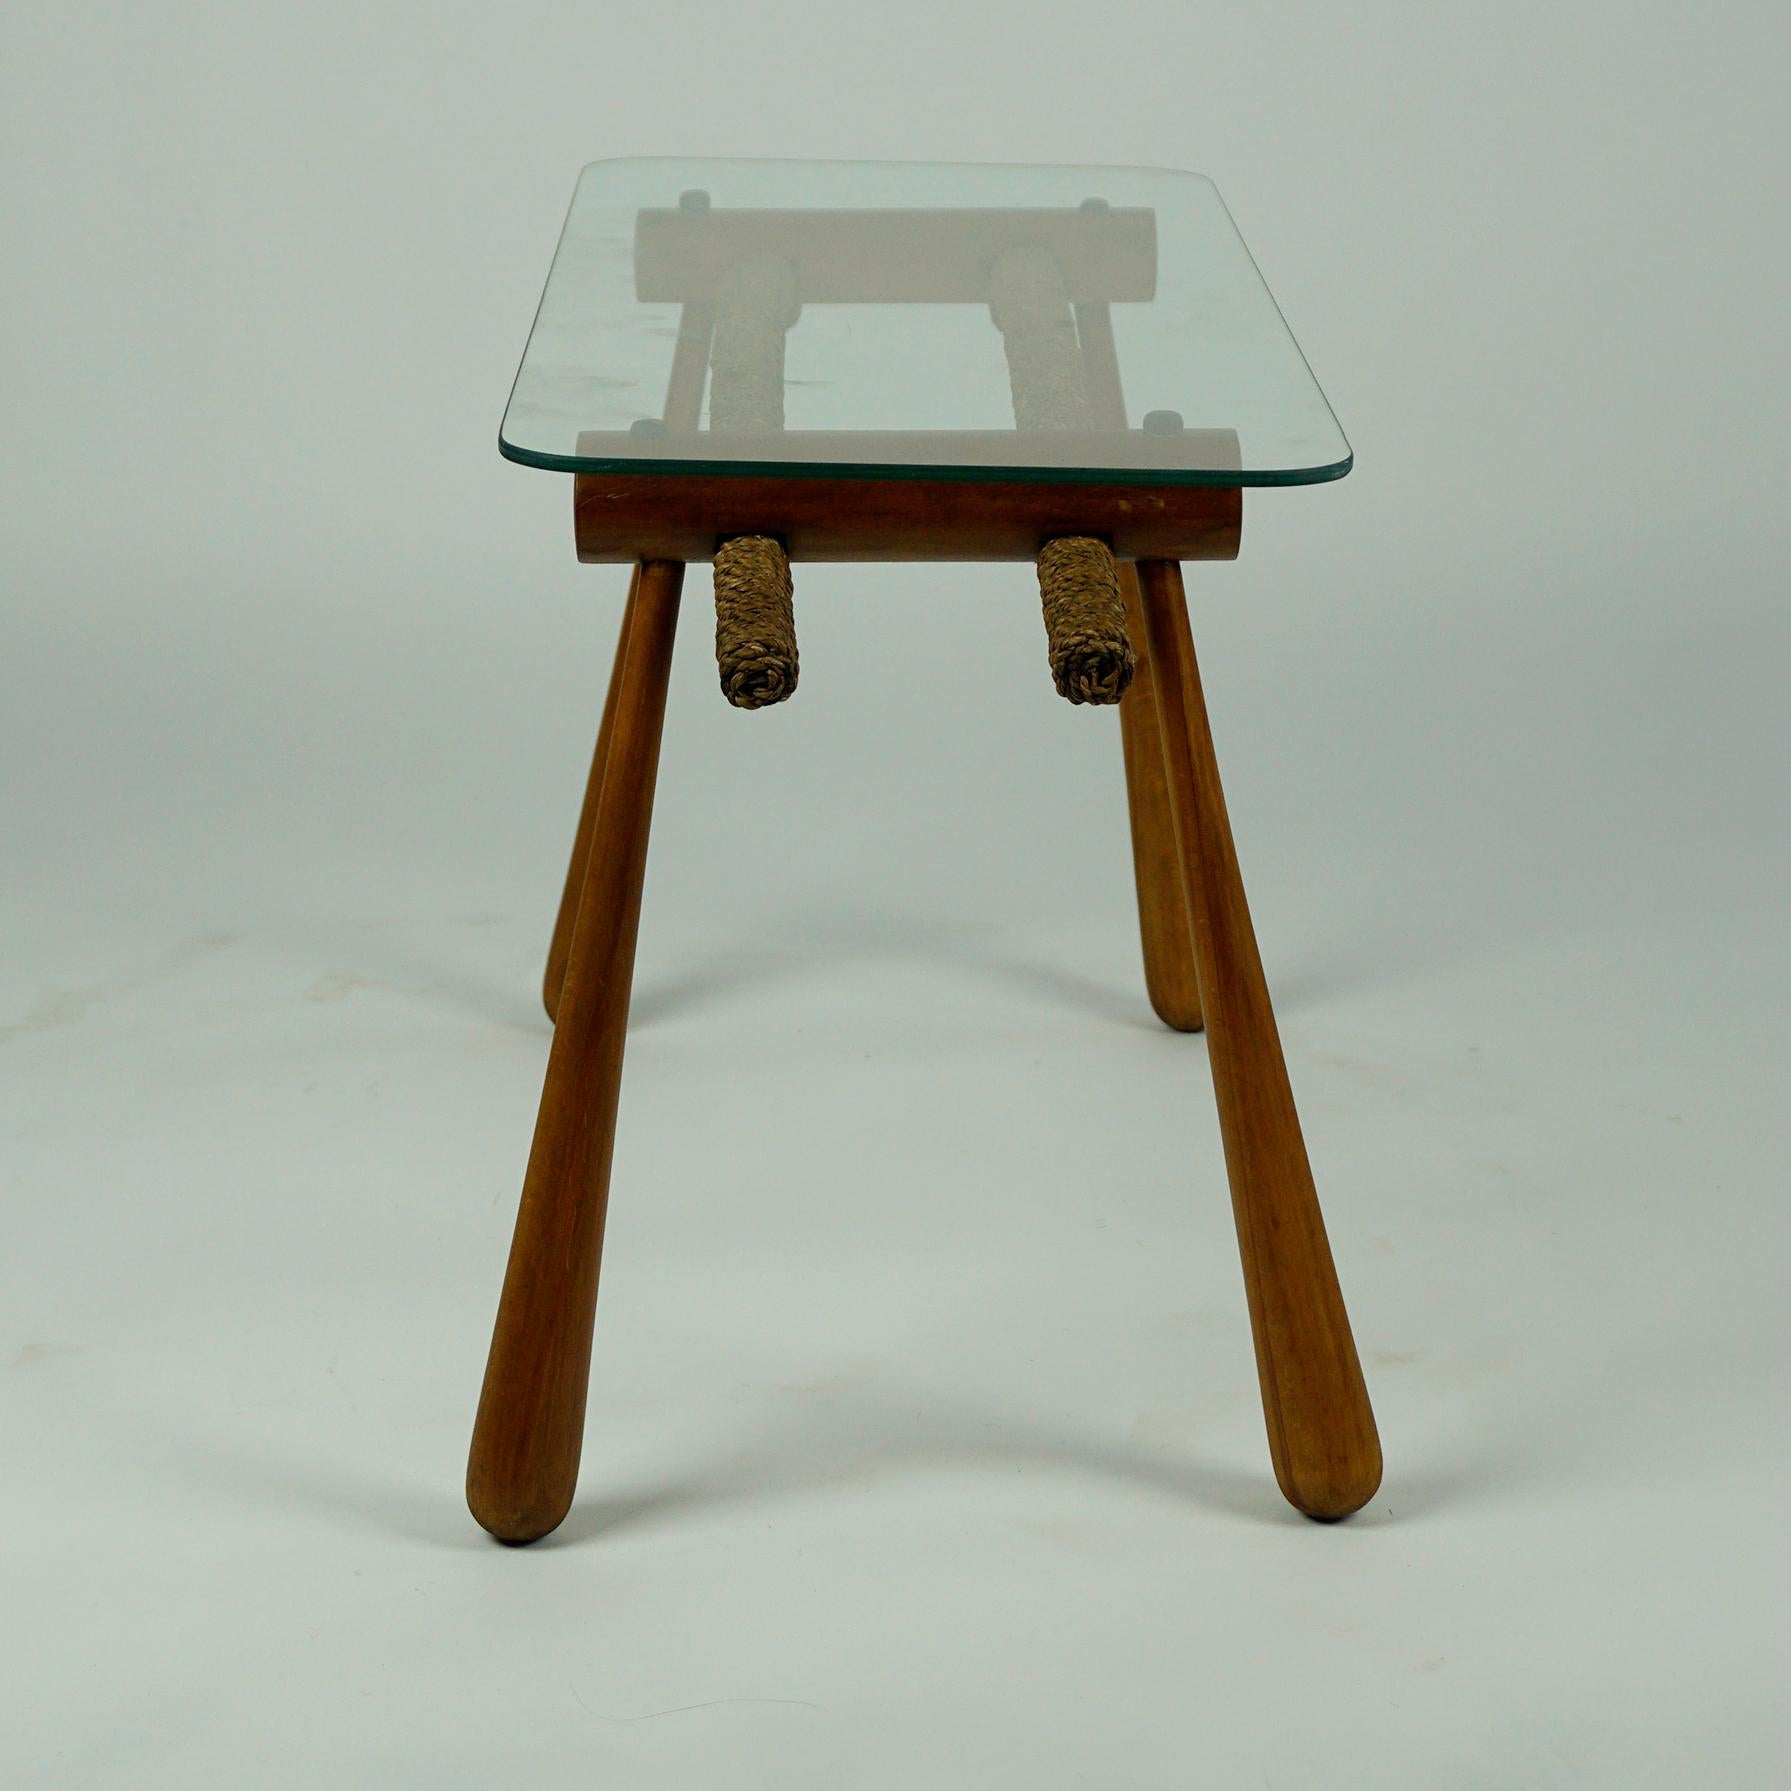 Mid-20th Century Austrian Midcentury Beechwood Side Table with Cord and Glass Top by Max Kment For Sale